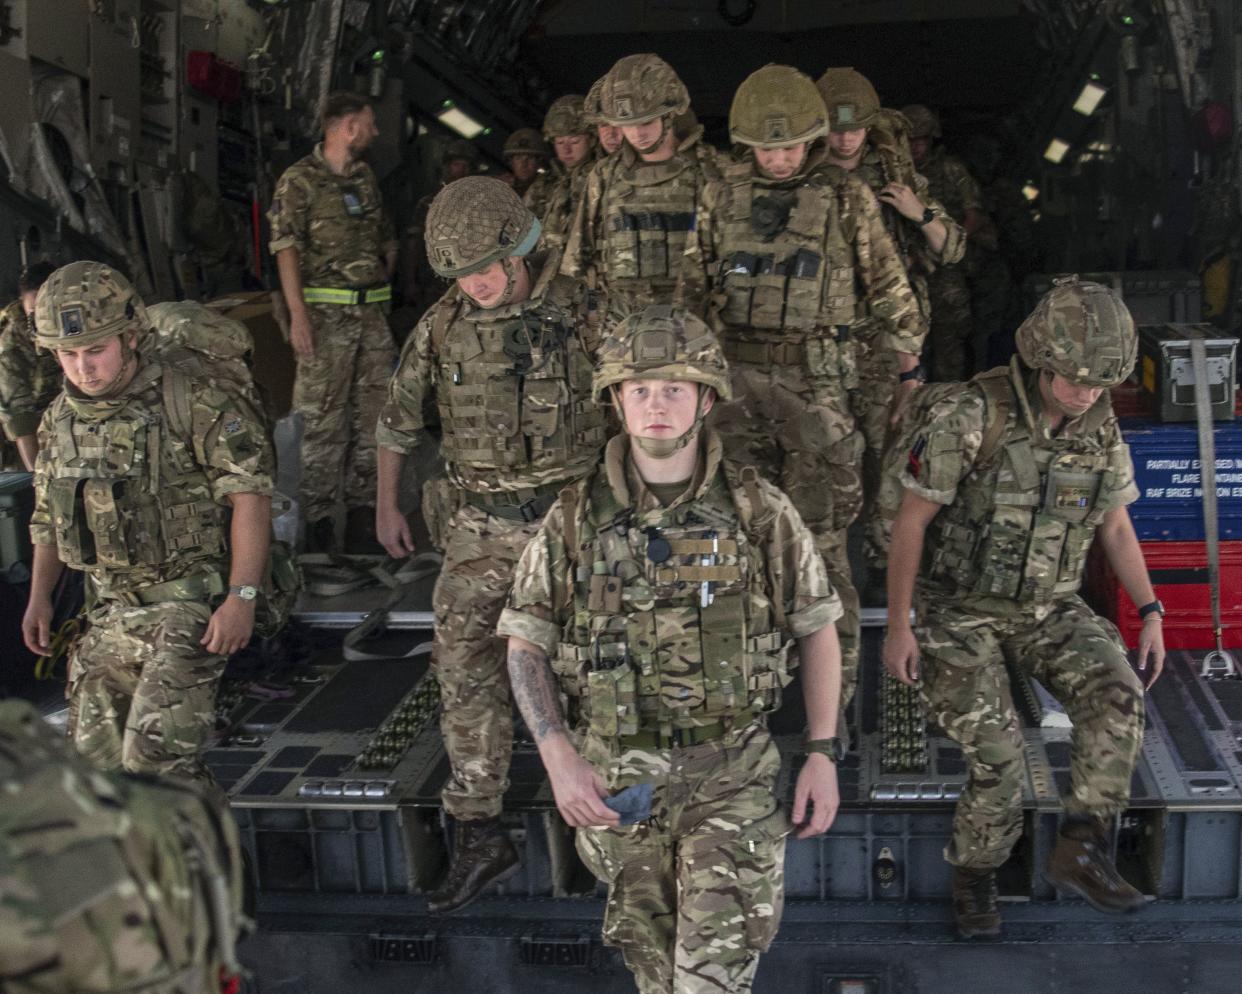 In this photo provided by the Ministry of Defence on Sunday, Aug. 15, 2021, members of the 16 Air Assault Brigade arrive in Kabul as part of a 600-strong UK force sent to assist with Operation PITTING to rescue British nationals in Afghanistan amidst the worsening security situation there.